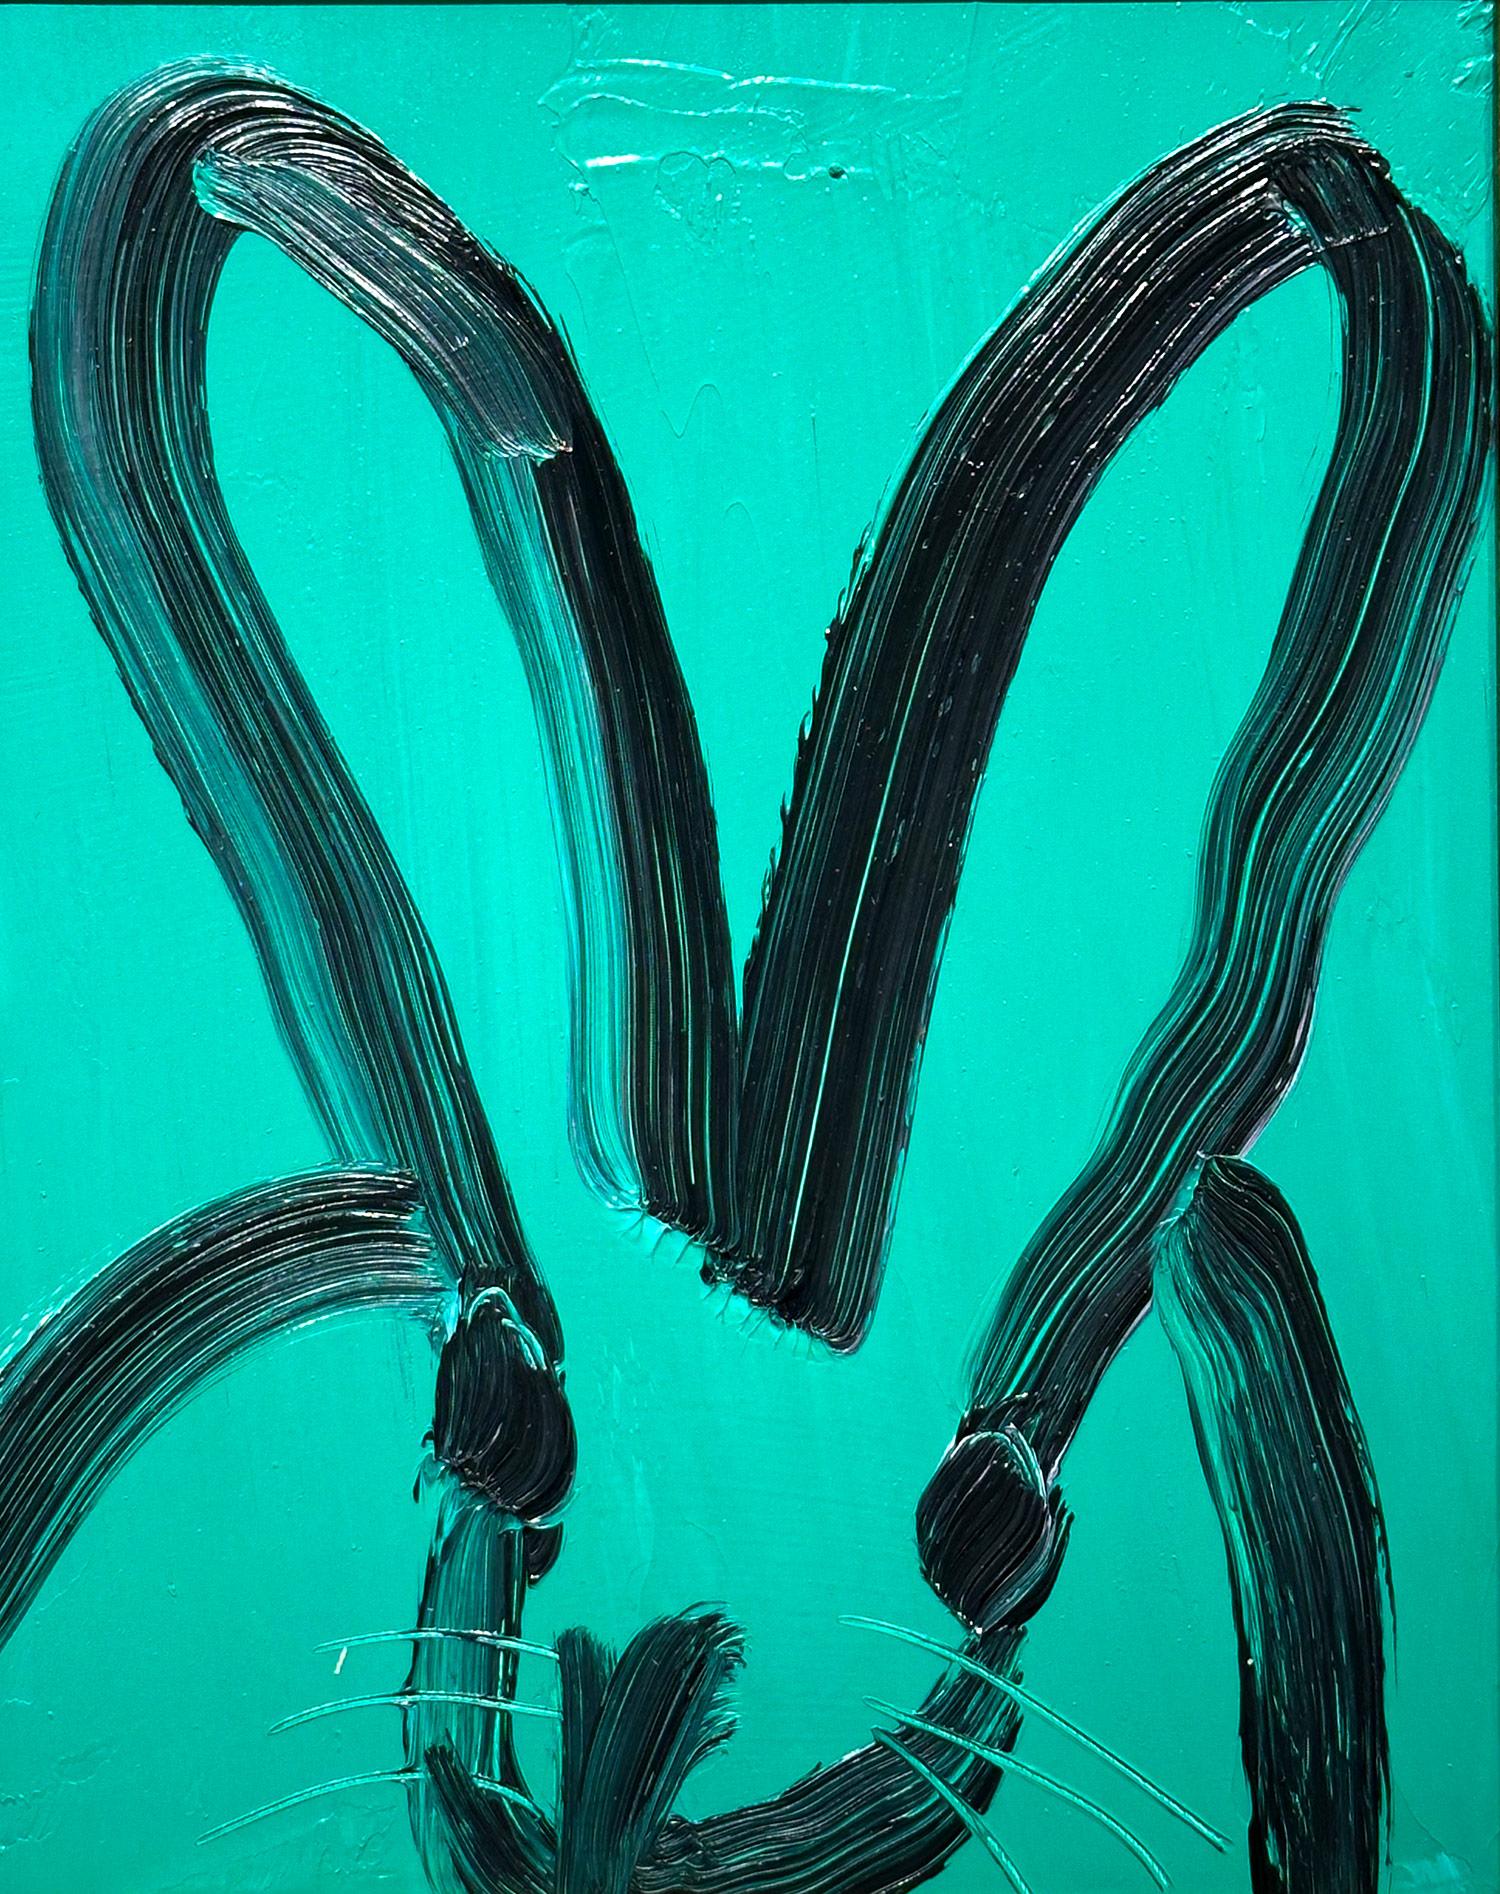 A wonderful composition of one of Slonem's most iconic subjects, Bunnies. This piece depicts a gestural figure of a black bunny on an Emerald green background with thick use of paint. Inspired by nature and a genuine love for animals, Slonem's